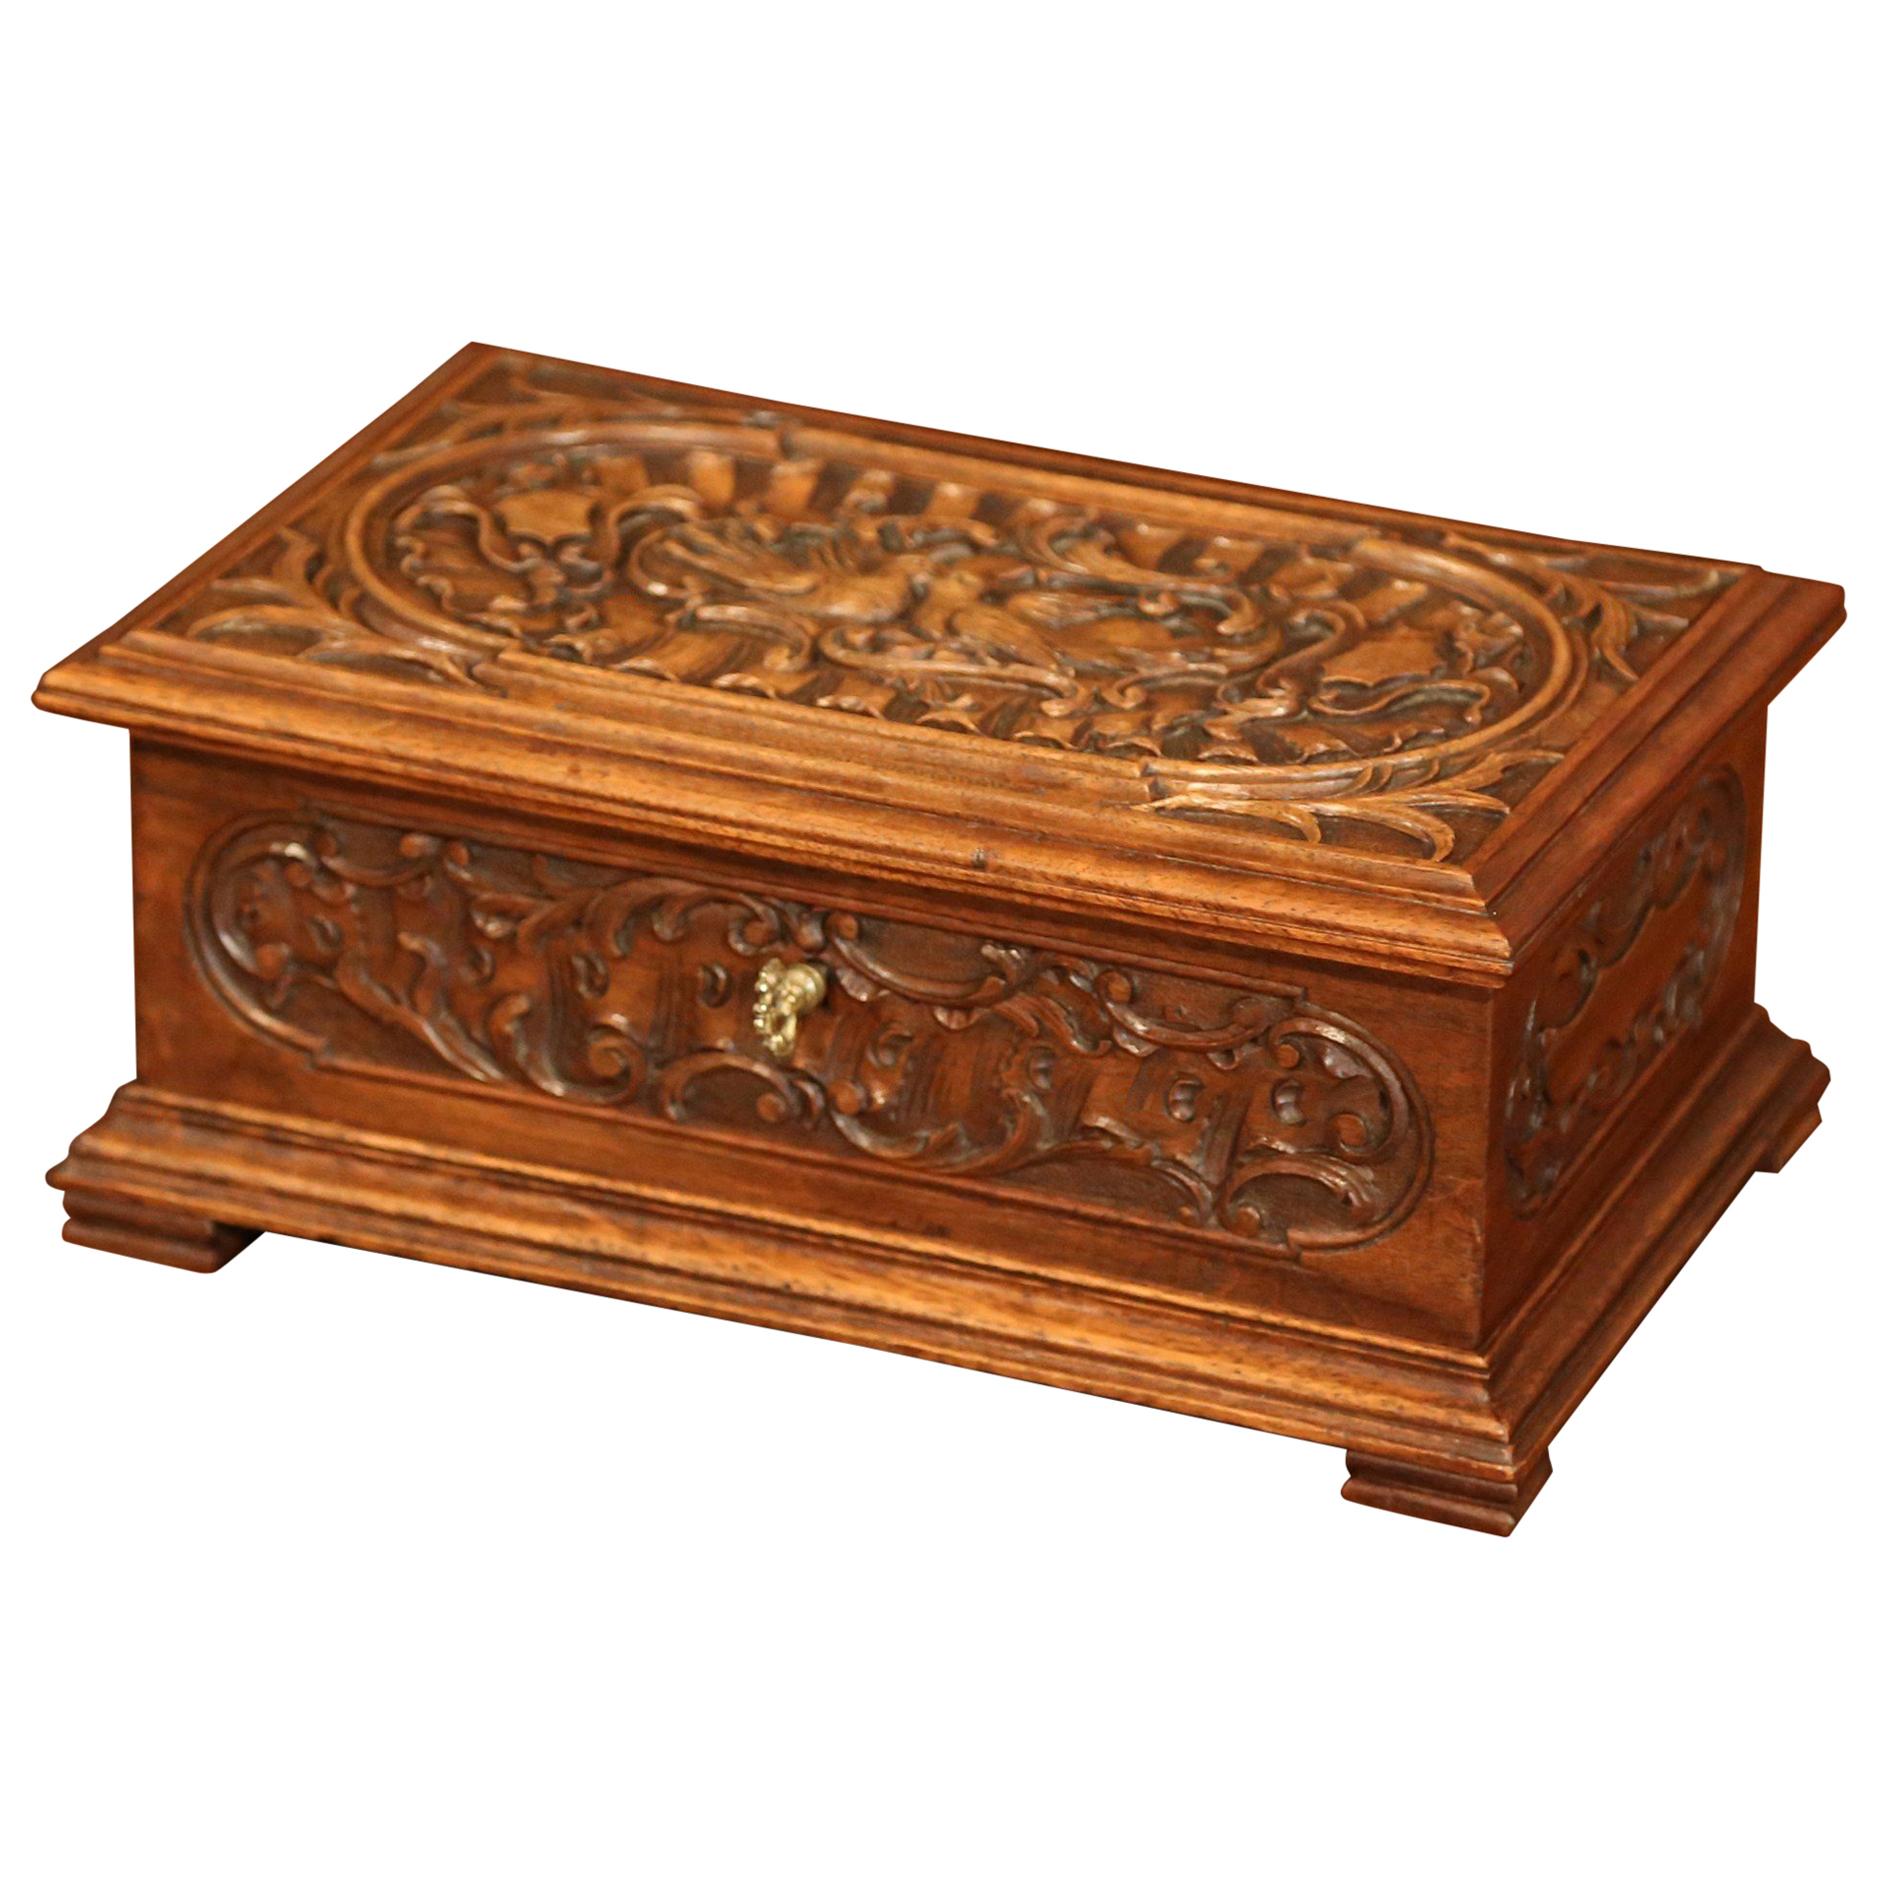 19th Century French Black Forest Carved Walnut Jewelry Box with Loving Birds